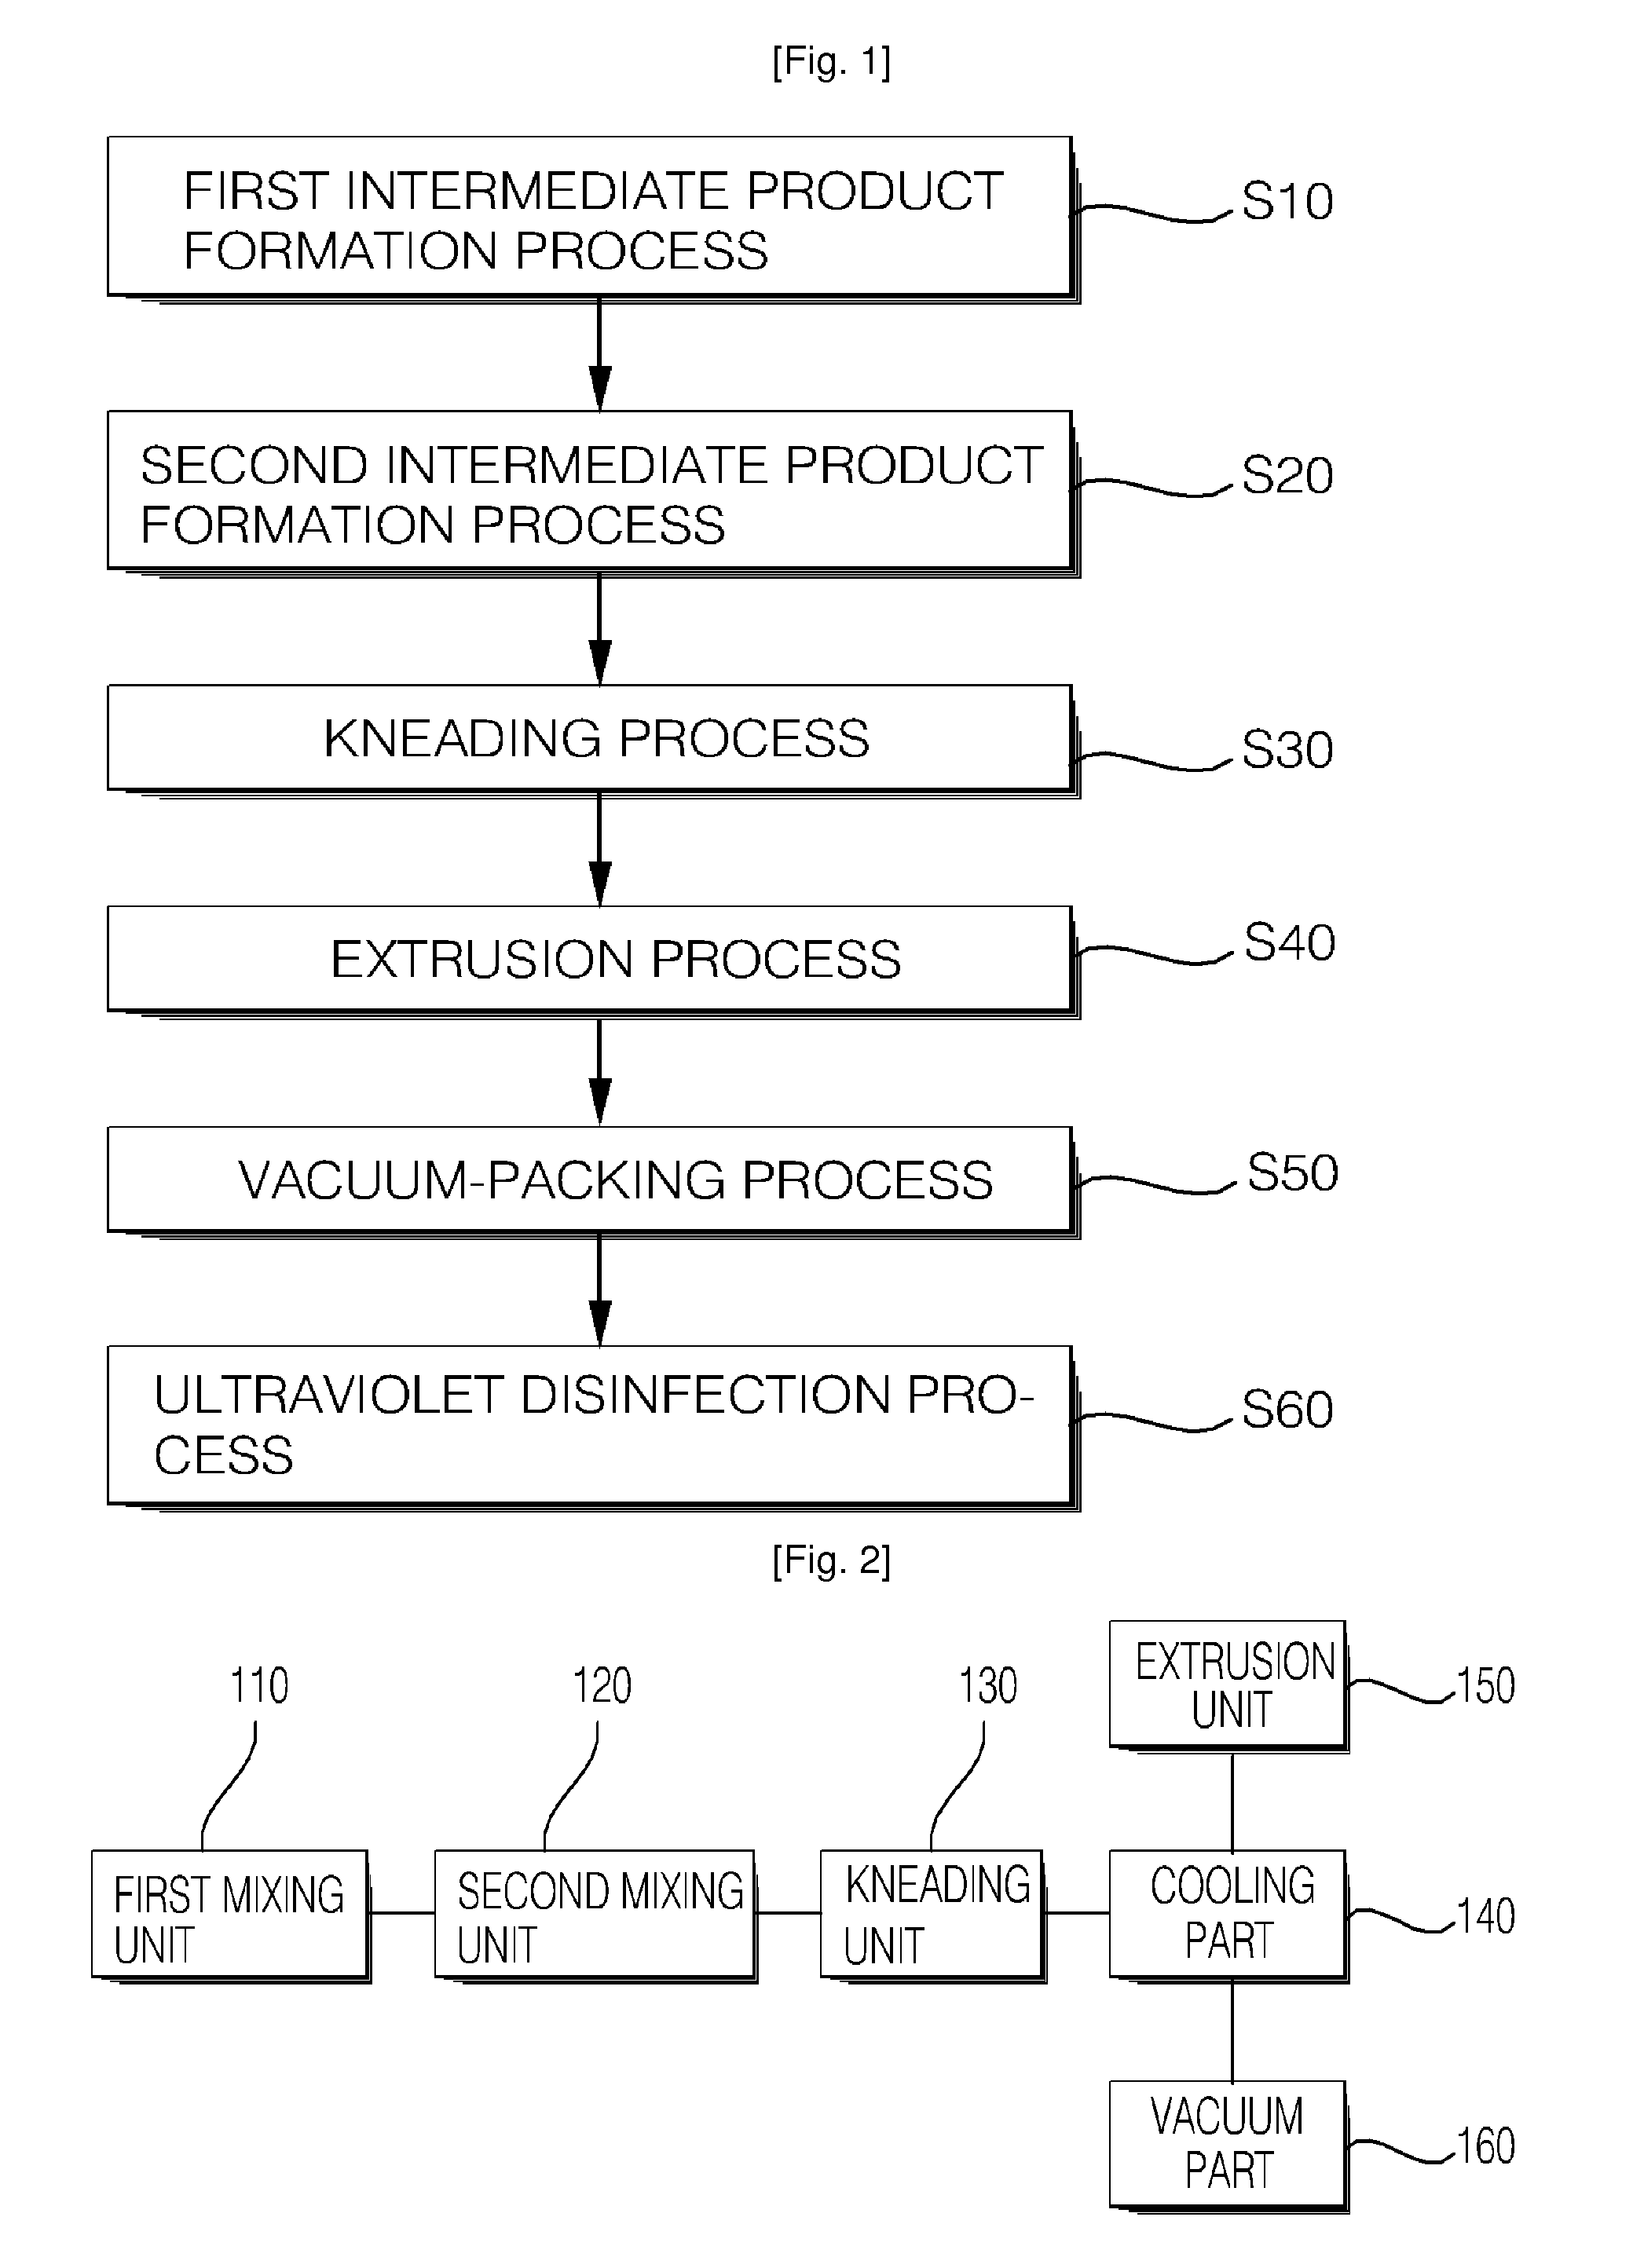 Artificial Bait for Attracting Fish, and Apparatus and Method of Manufacturing the Same